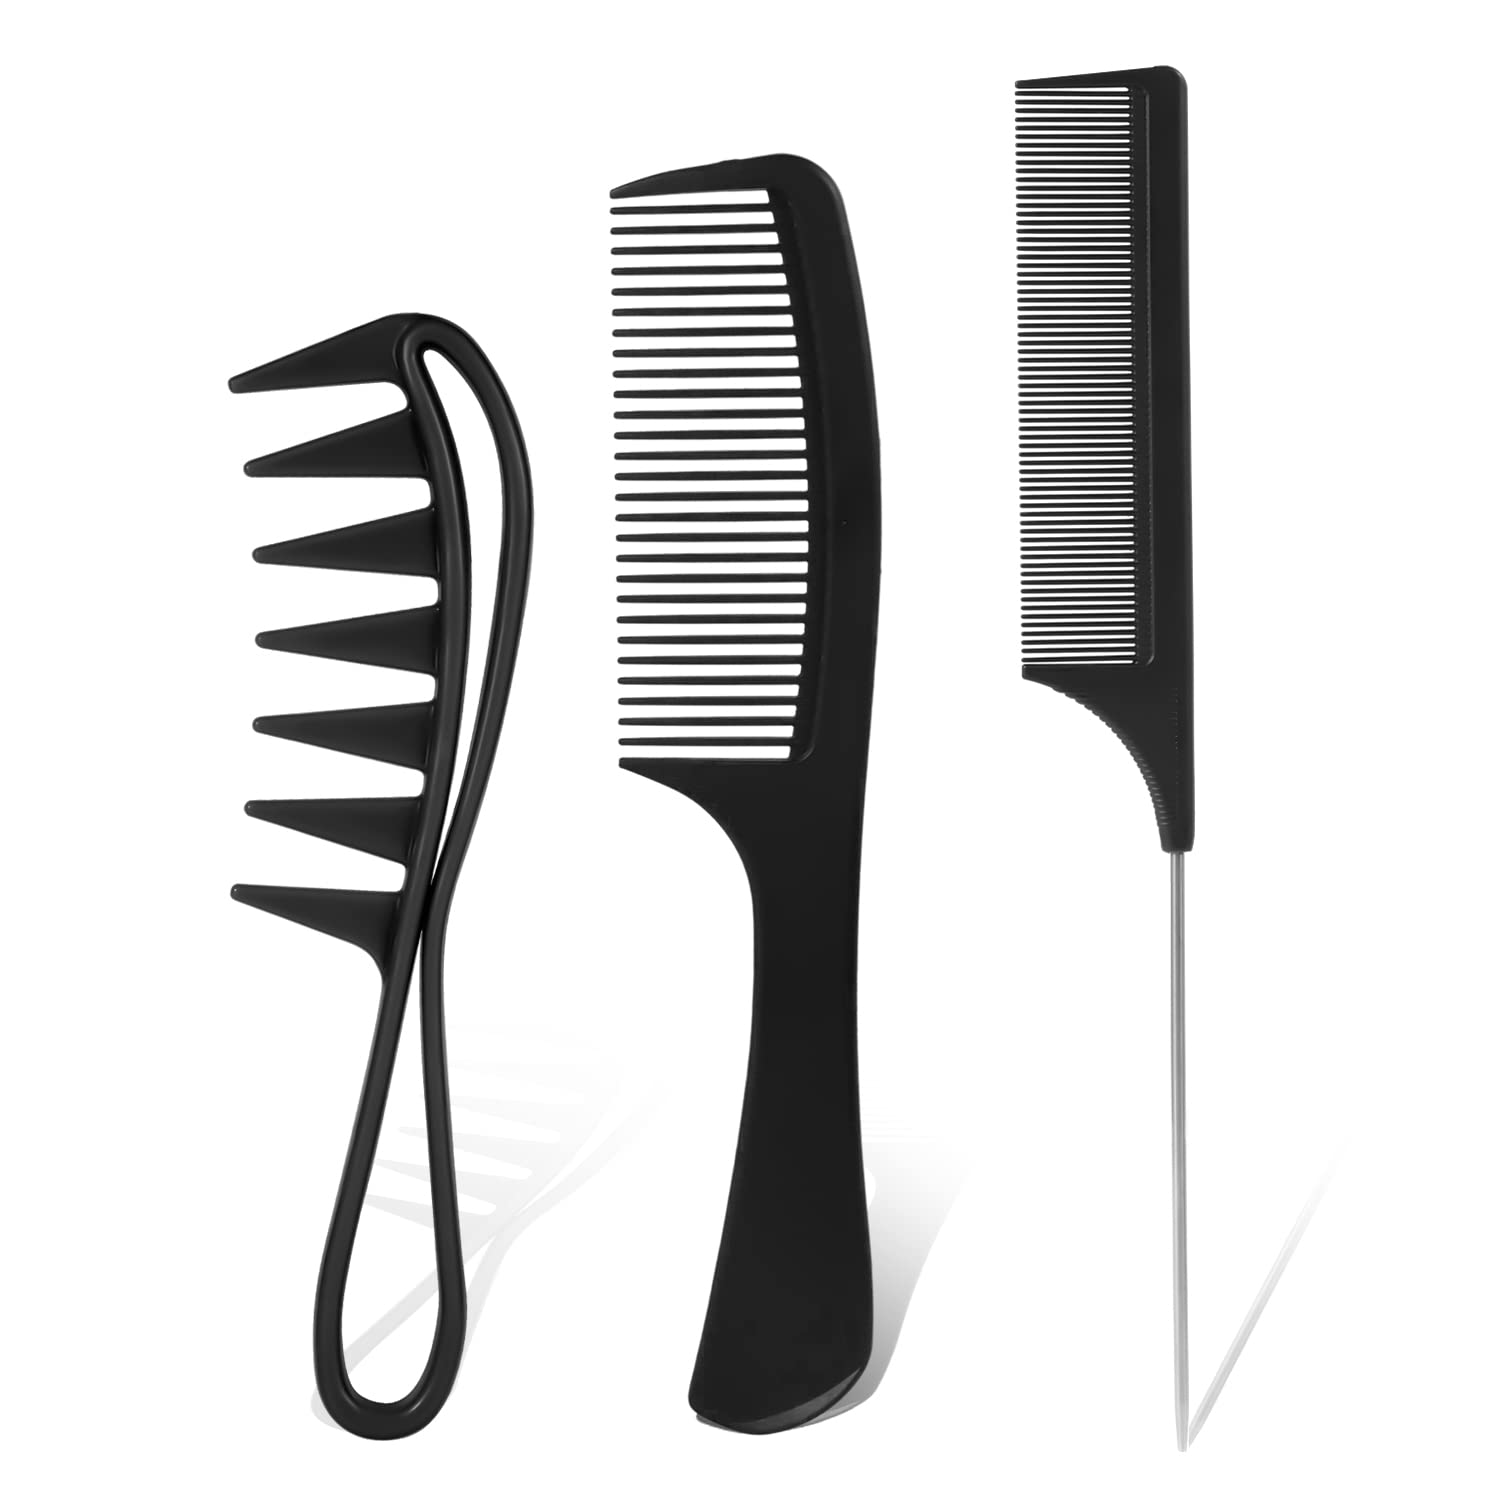 kinbom 3-Piece Hair Comb Set, Tooth Comb, Wide Tooth Comb, Rat Tail Comb, Wide Tooth Comb for Curly, Wet, Wavy, Thick Hair, Wigs, Salon, Antstatic, Heat Resistant (Black)